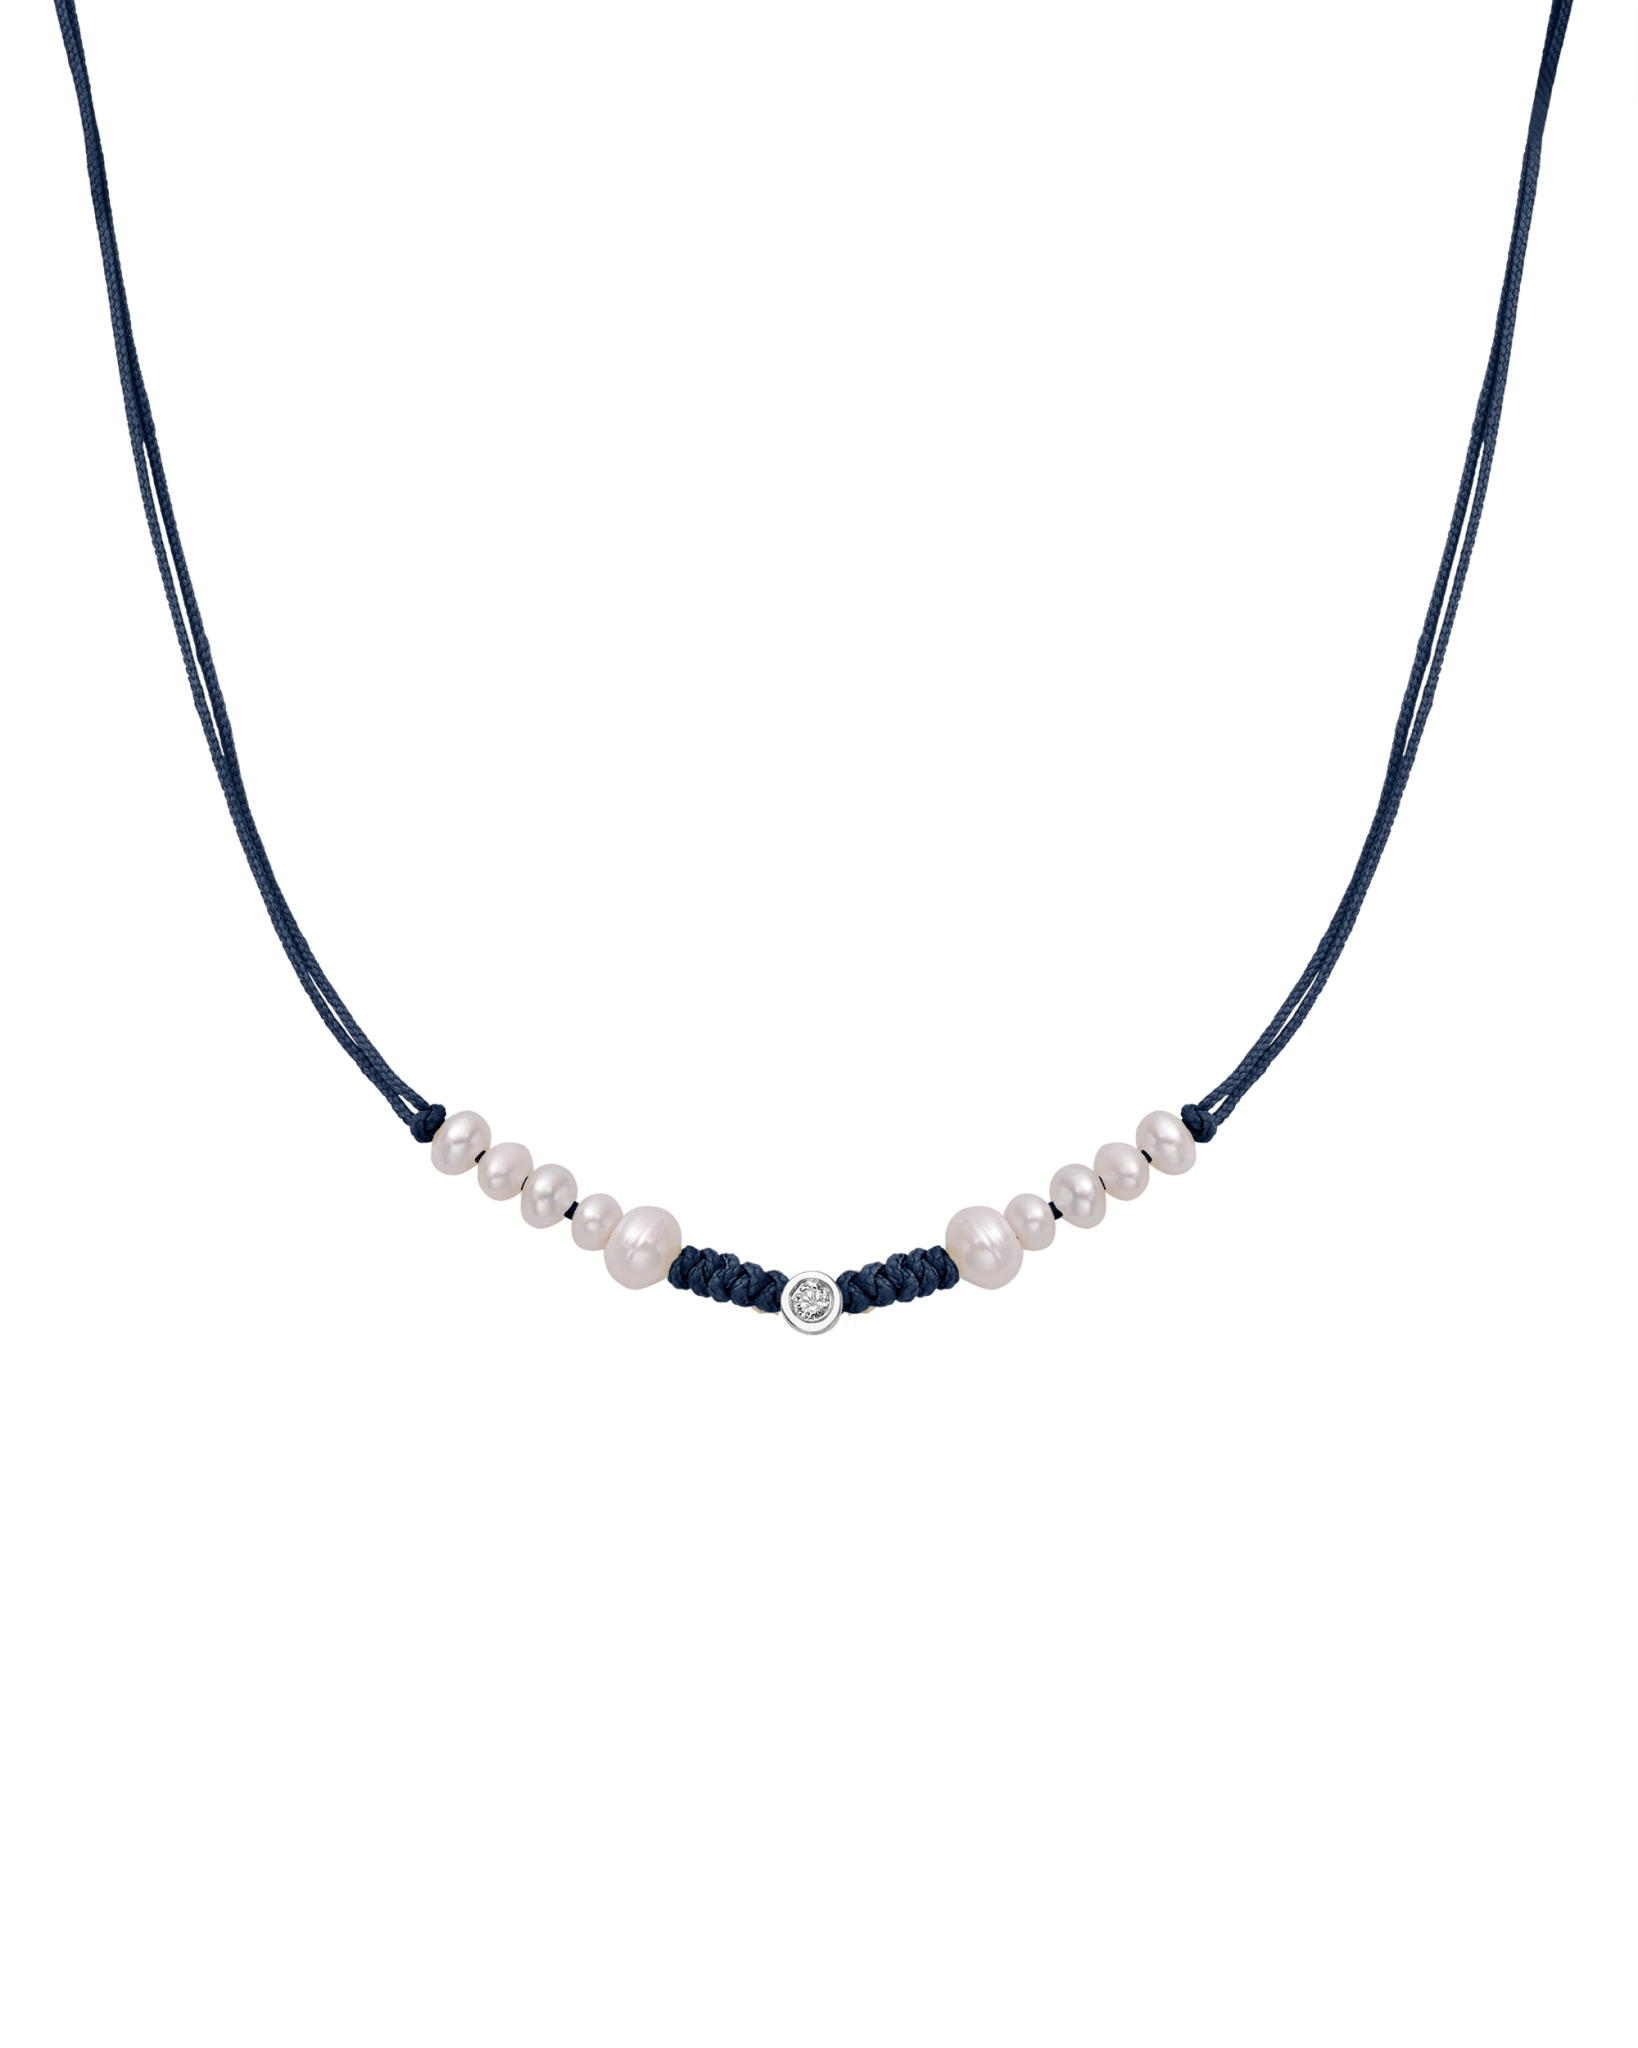 Ten Natural Pearl String of Love Necklace - 14K White Gold Necklaces 14K Solid Gold Navy Blue Medium: 0.04ct 